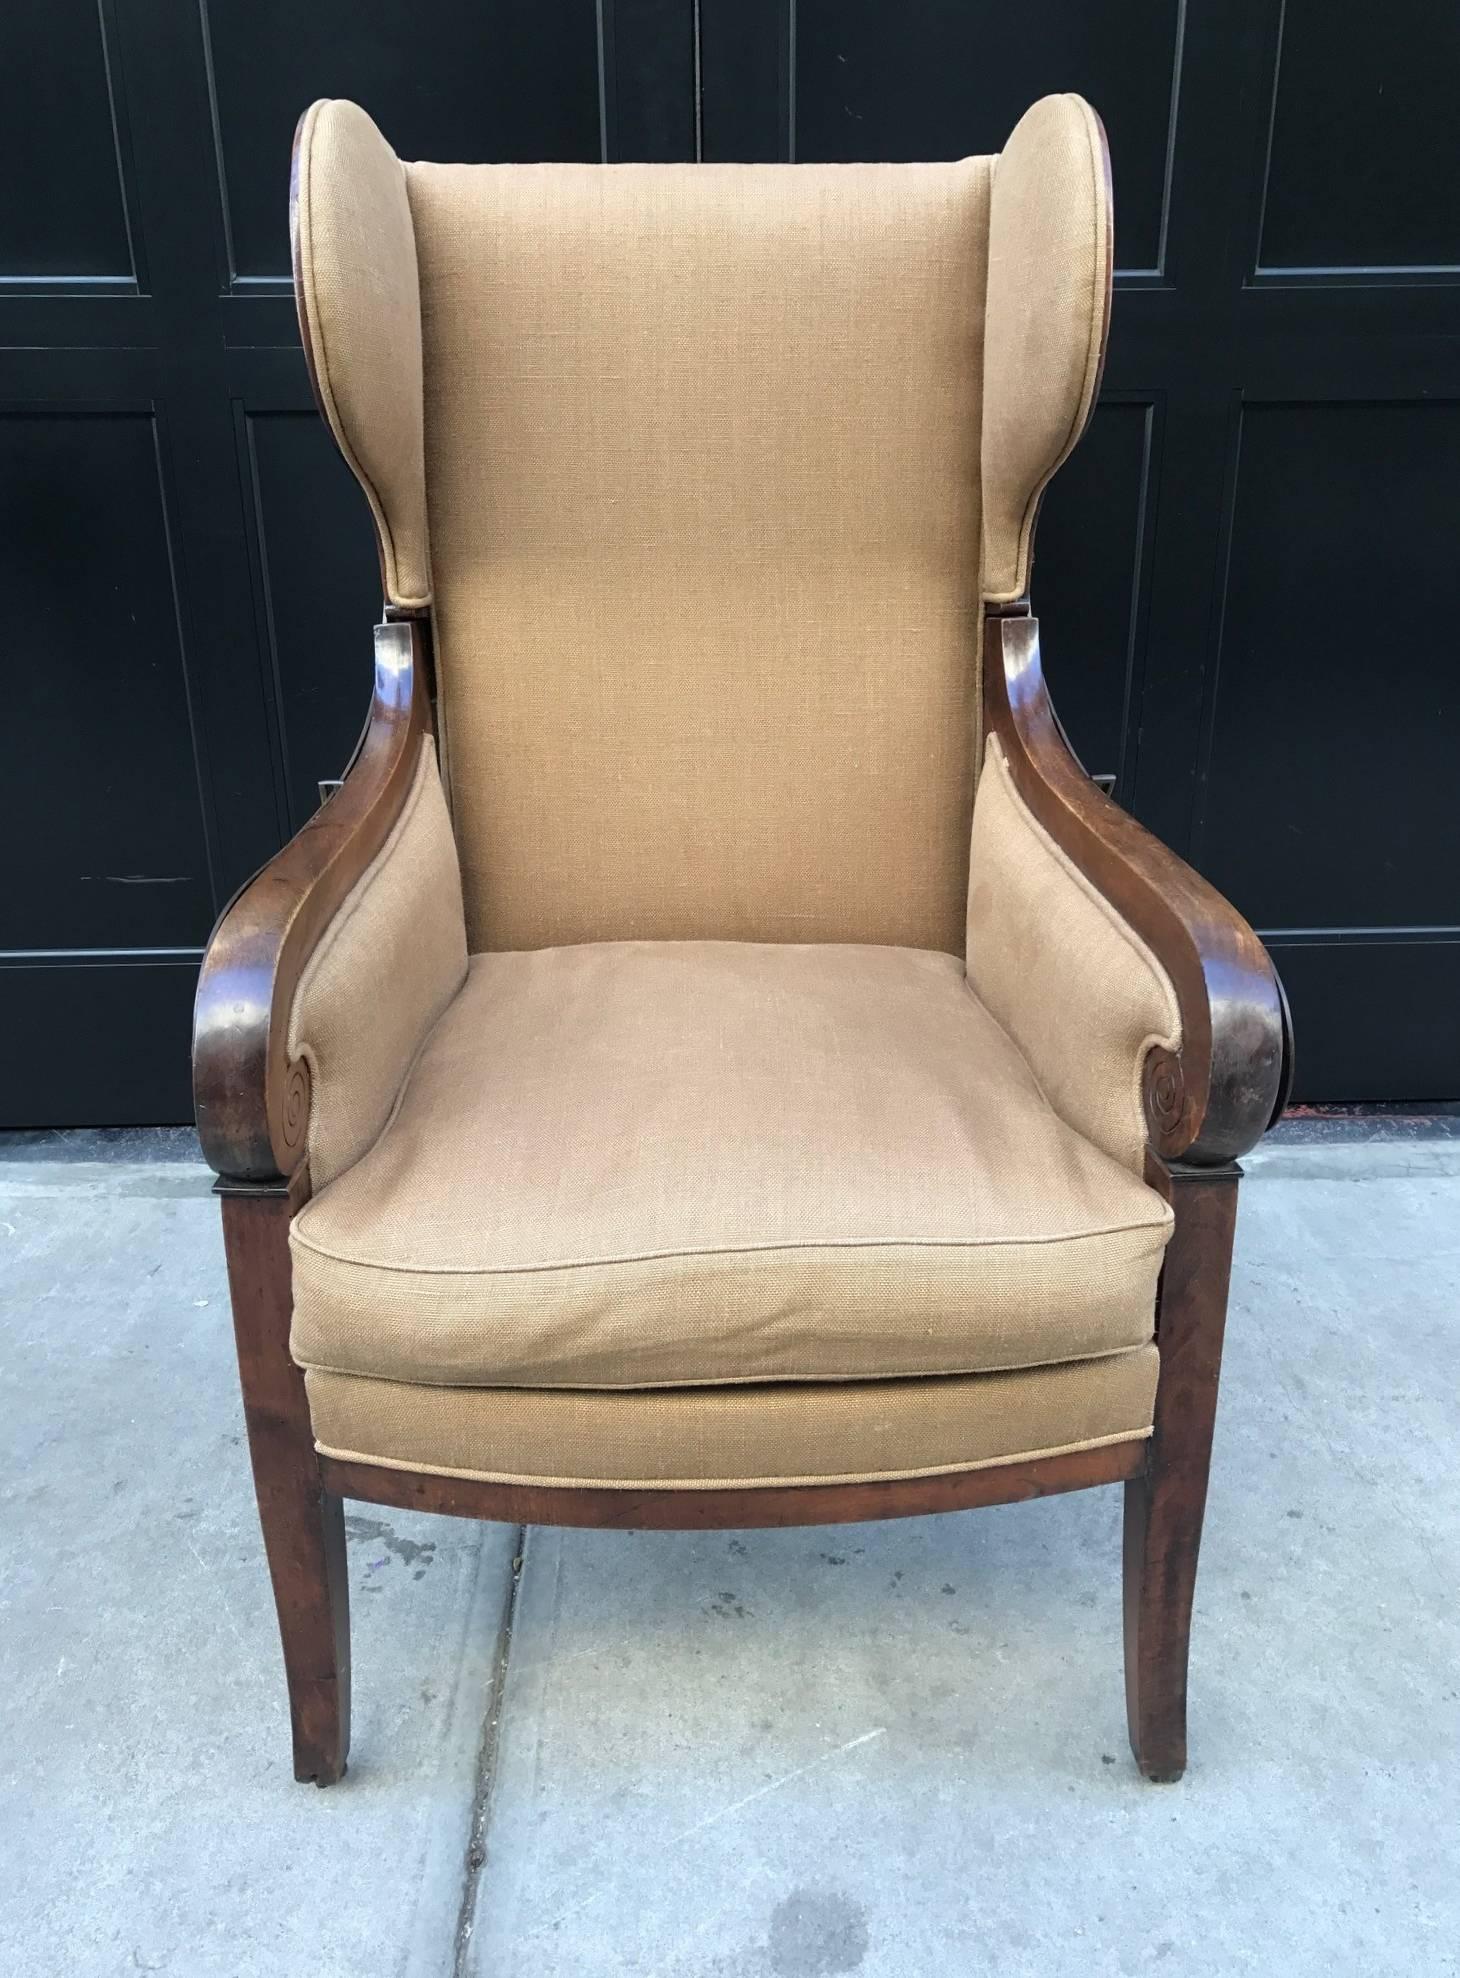 Antique, Biedermeier reclining wingback chair with a walnut frame. Has a down cushioned seat and casters. Reclining, iron, mechanism is in working order.